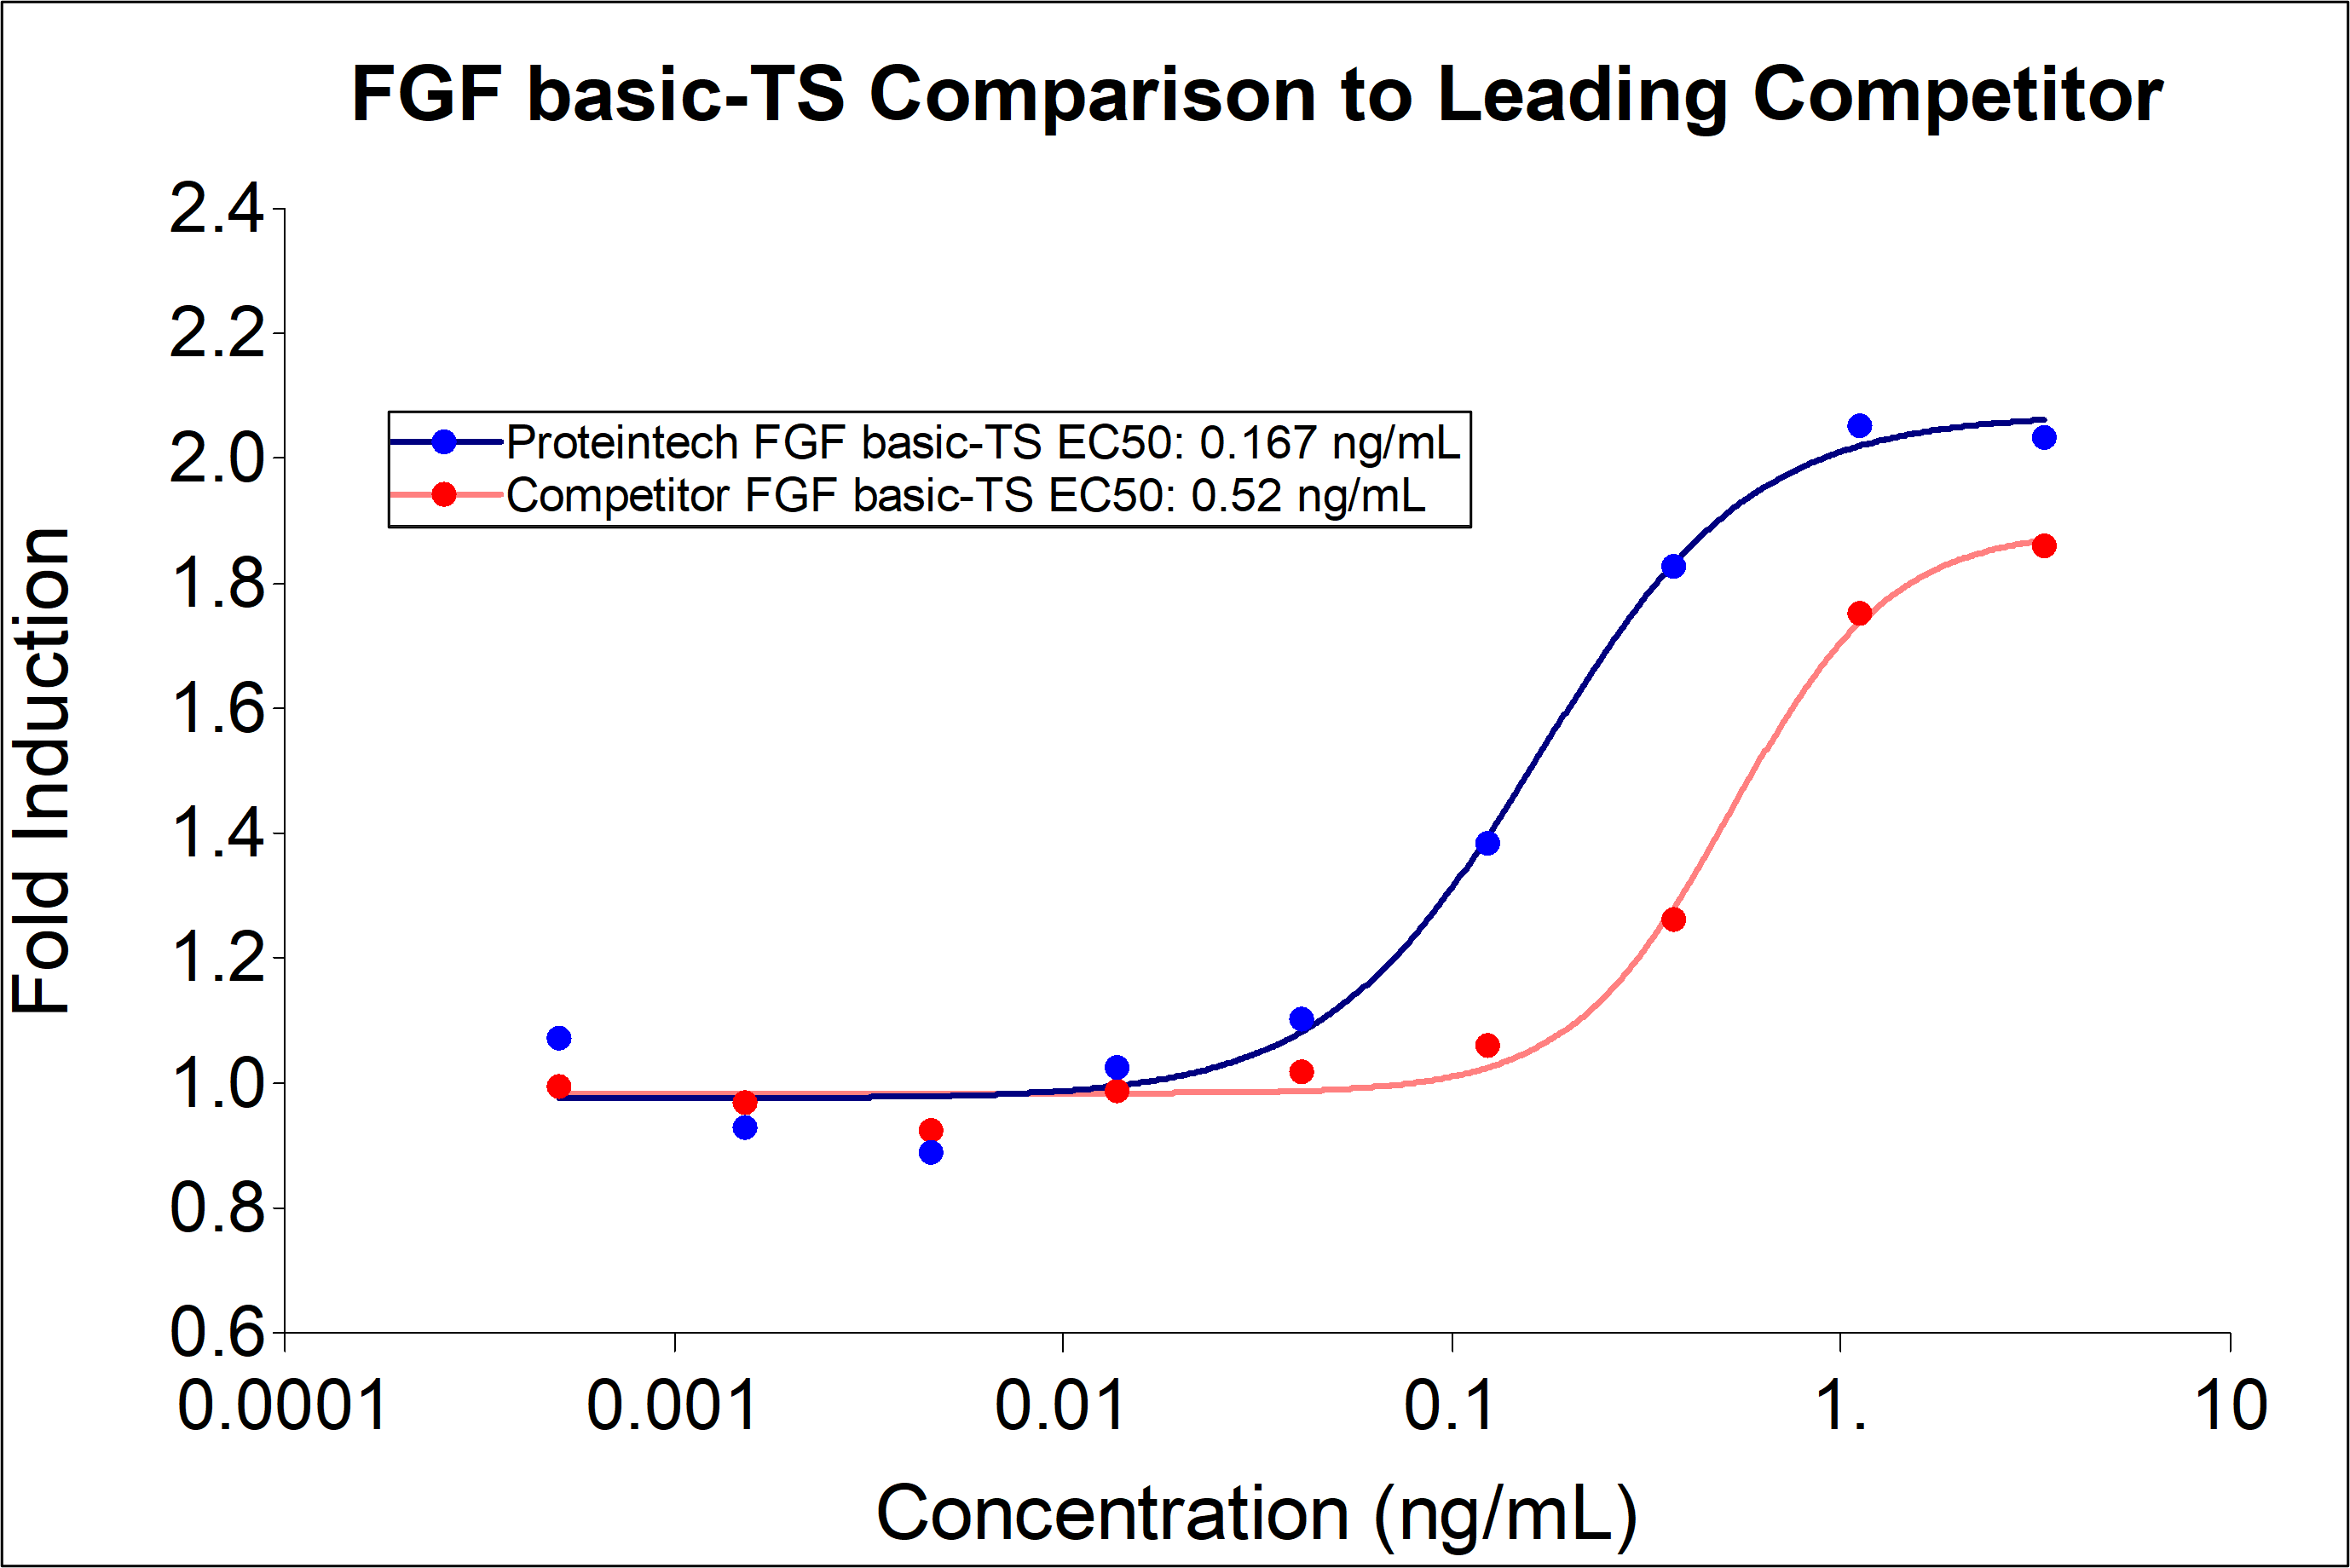 Proteintech FGF basic-TS (HZ-1285) demonstrates greater induction of proliferation and 3-fold lower EC50 compared to leading competitors. Recombinant human FGFbasic-TS  stimulates dose-dependent proliferation of the HDFa human primary fibroblast cell line. Cell number was quantitatively assessed by Promega CellTiter 96® cell viability reagent. HDFa cells were treated with increasing concentrations of recombinant FGFbasic-TS for 48  hours. The EC50 was determined using a 4-parameter non-linear regression model. The EC50 range is 0.05-0.4 ng/mL.